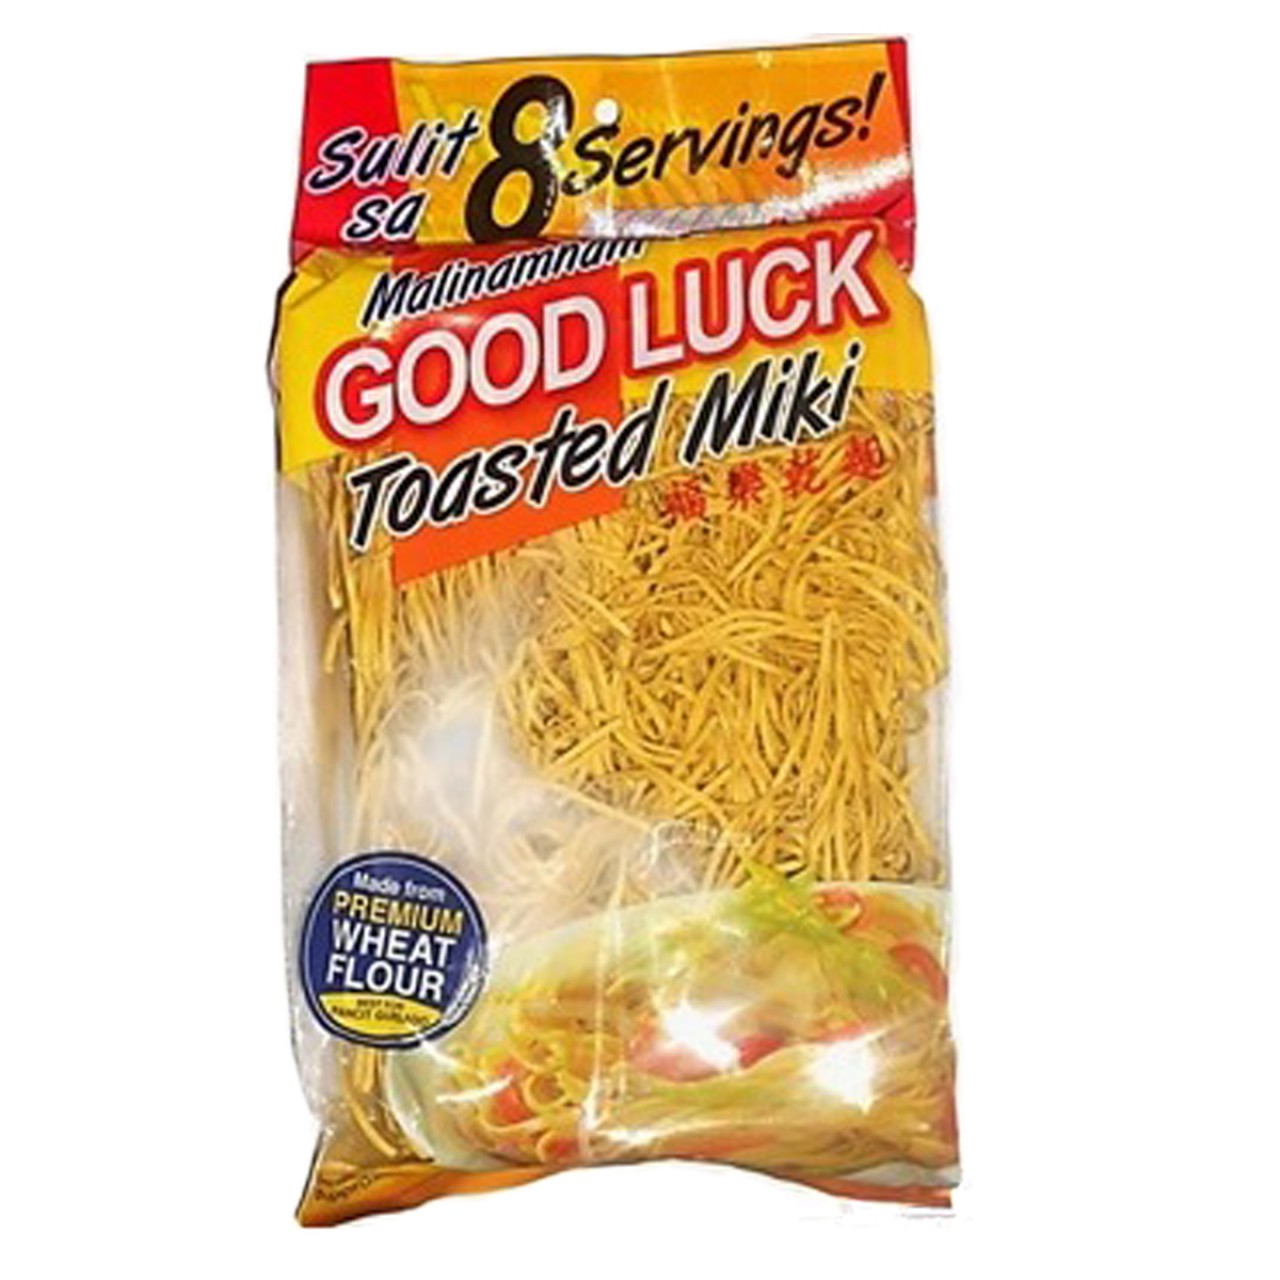 GOOD LUCK TOASTED MIKI 500G  